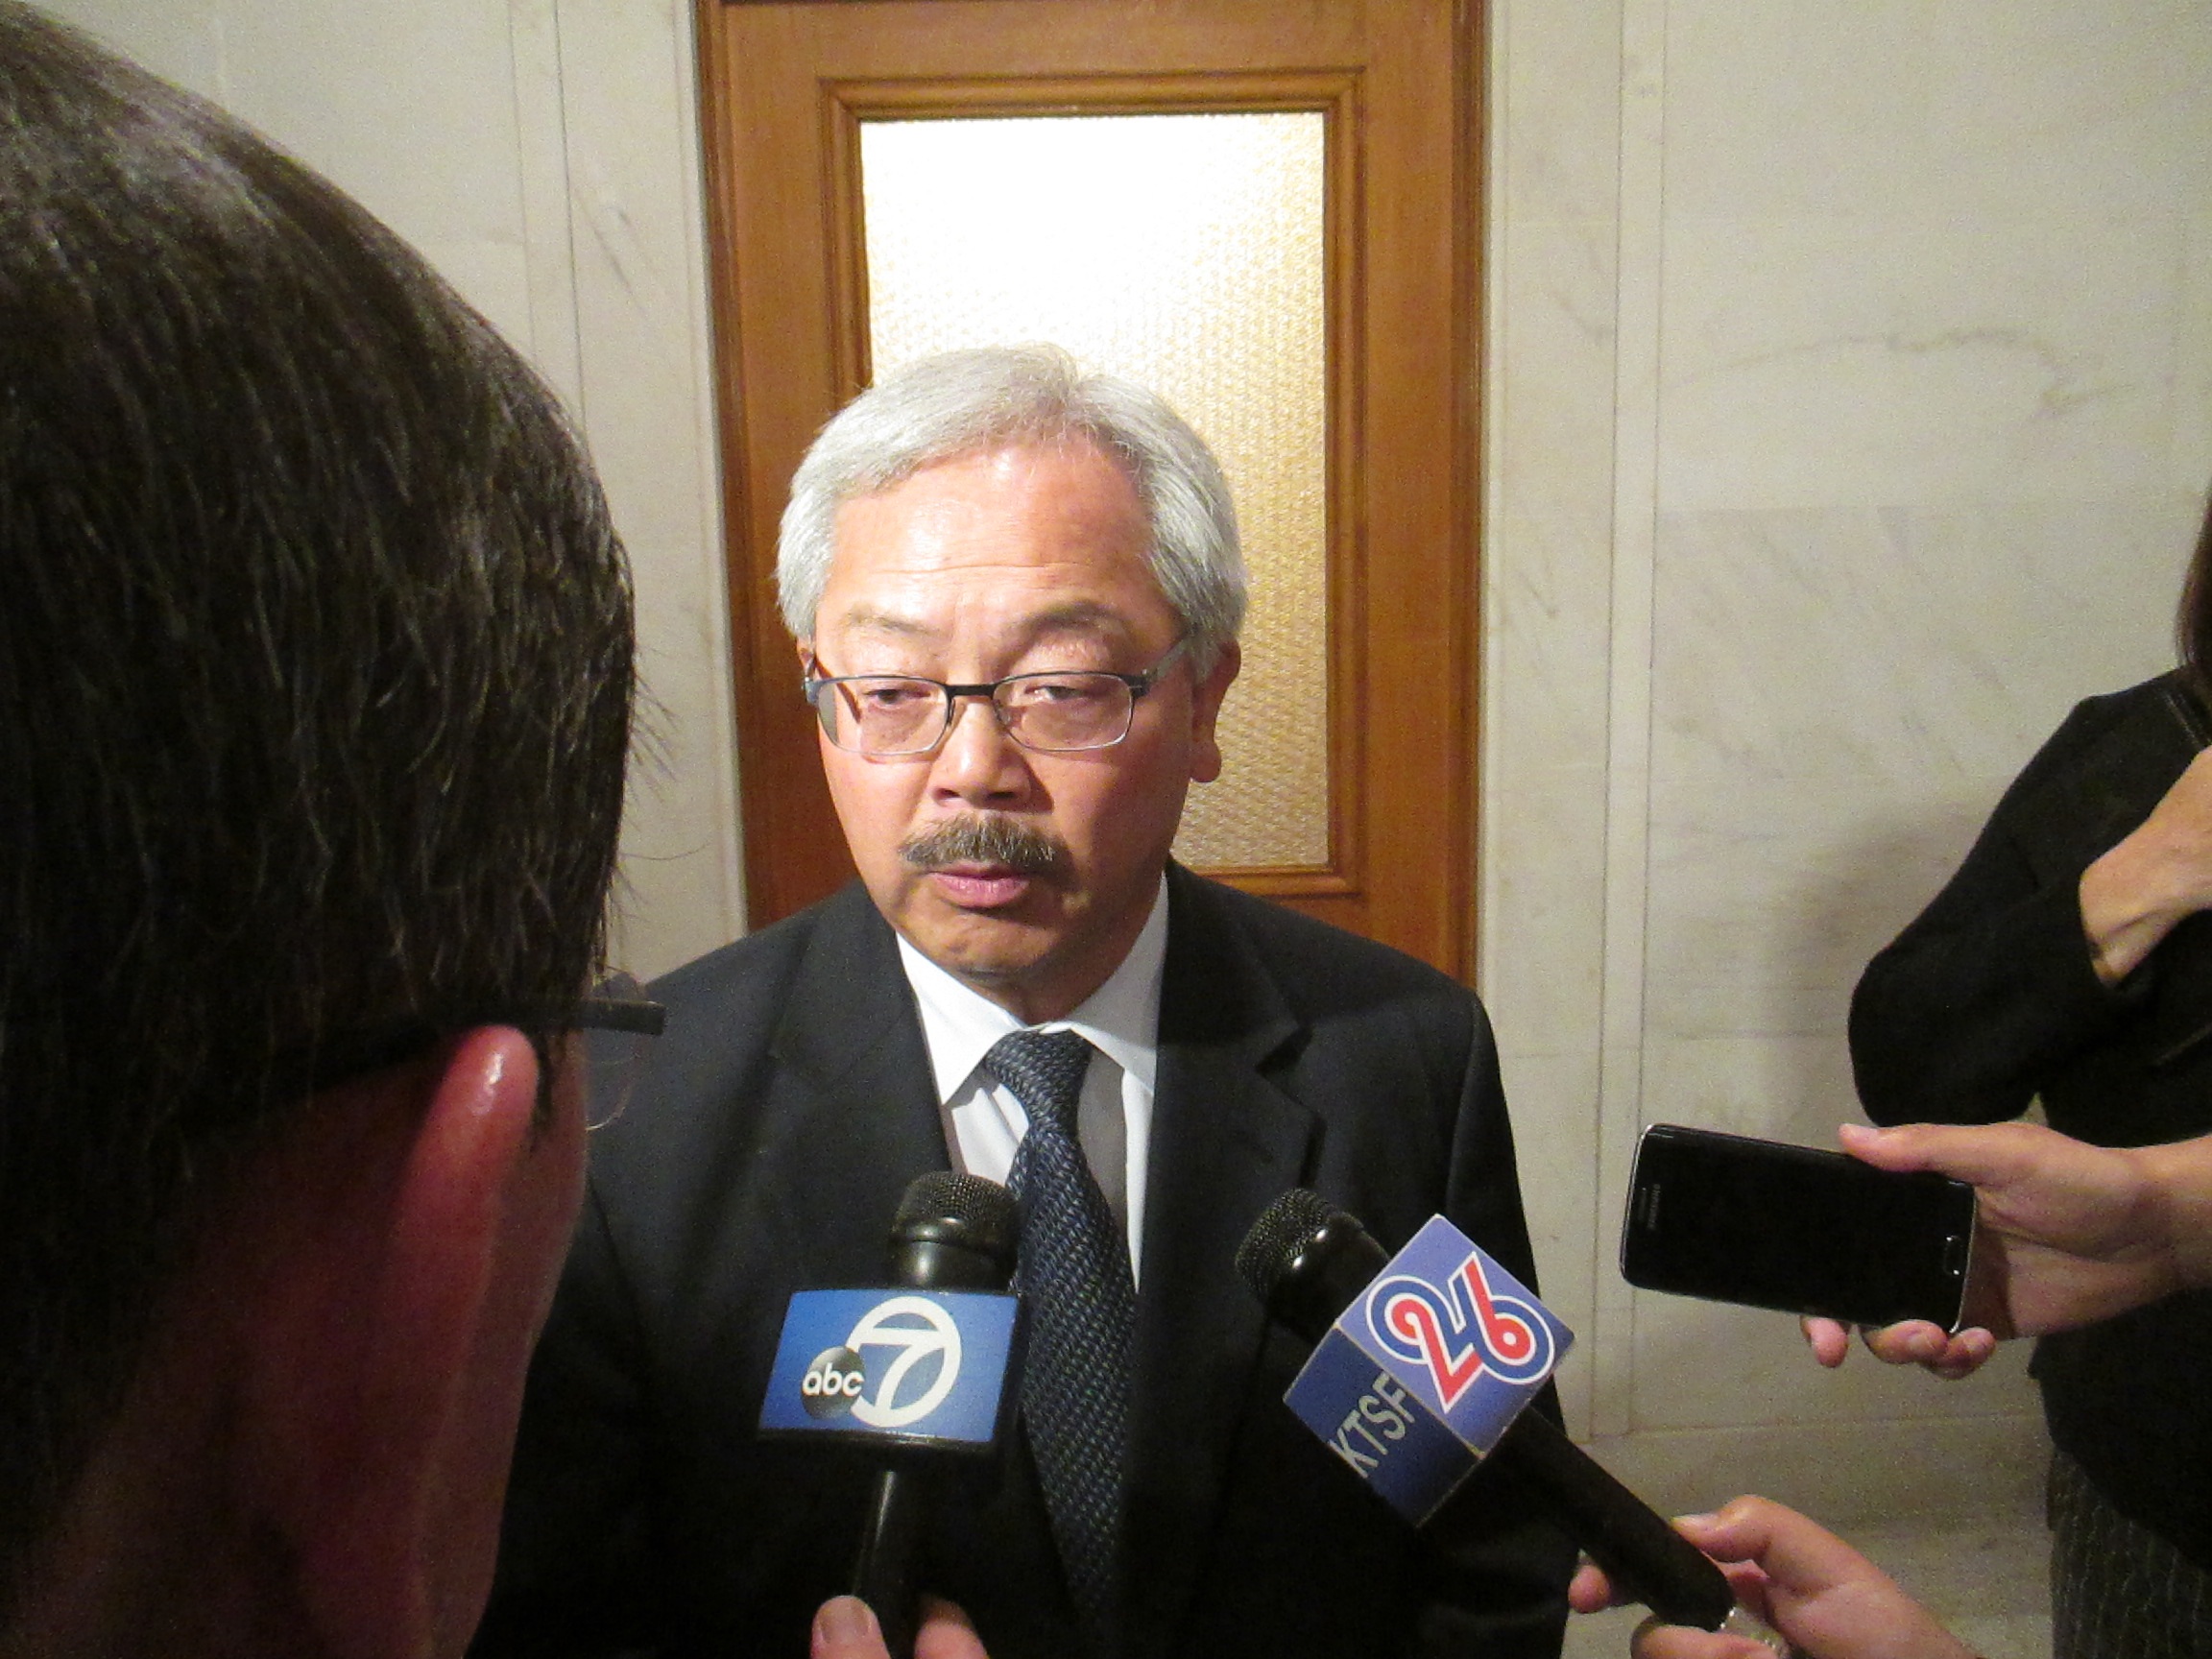 Mayor Lee refused to talk about the homeless policy measures by Farrell and Wiener 